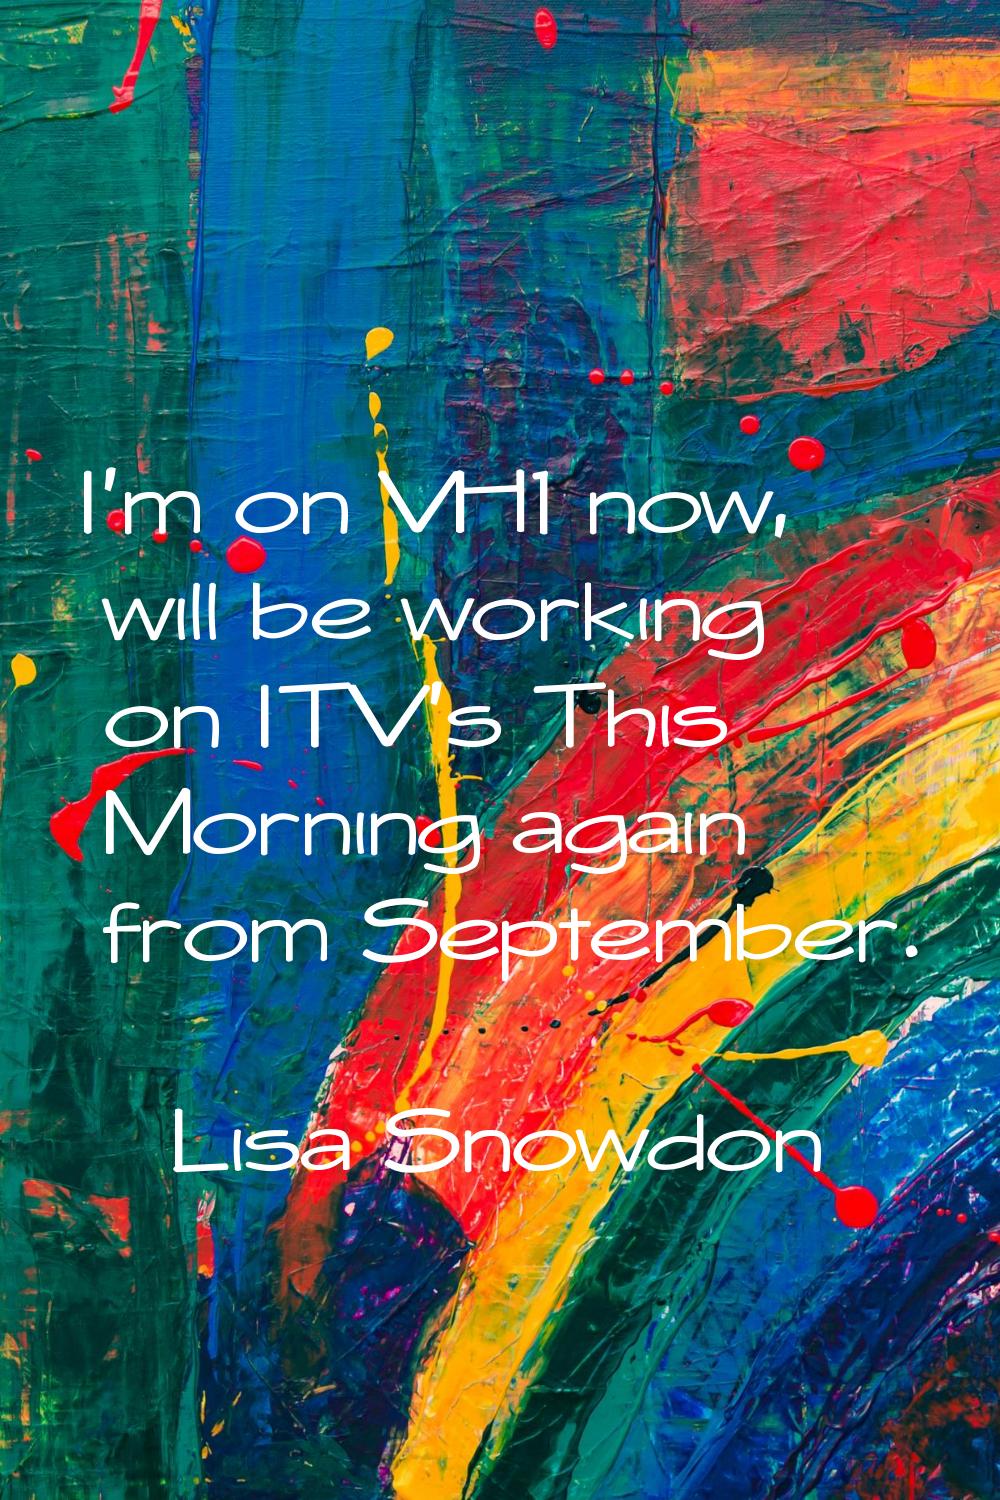 I'm on VH1 now, will be working on ITV's This Morning again from September.